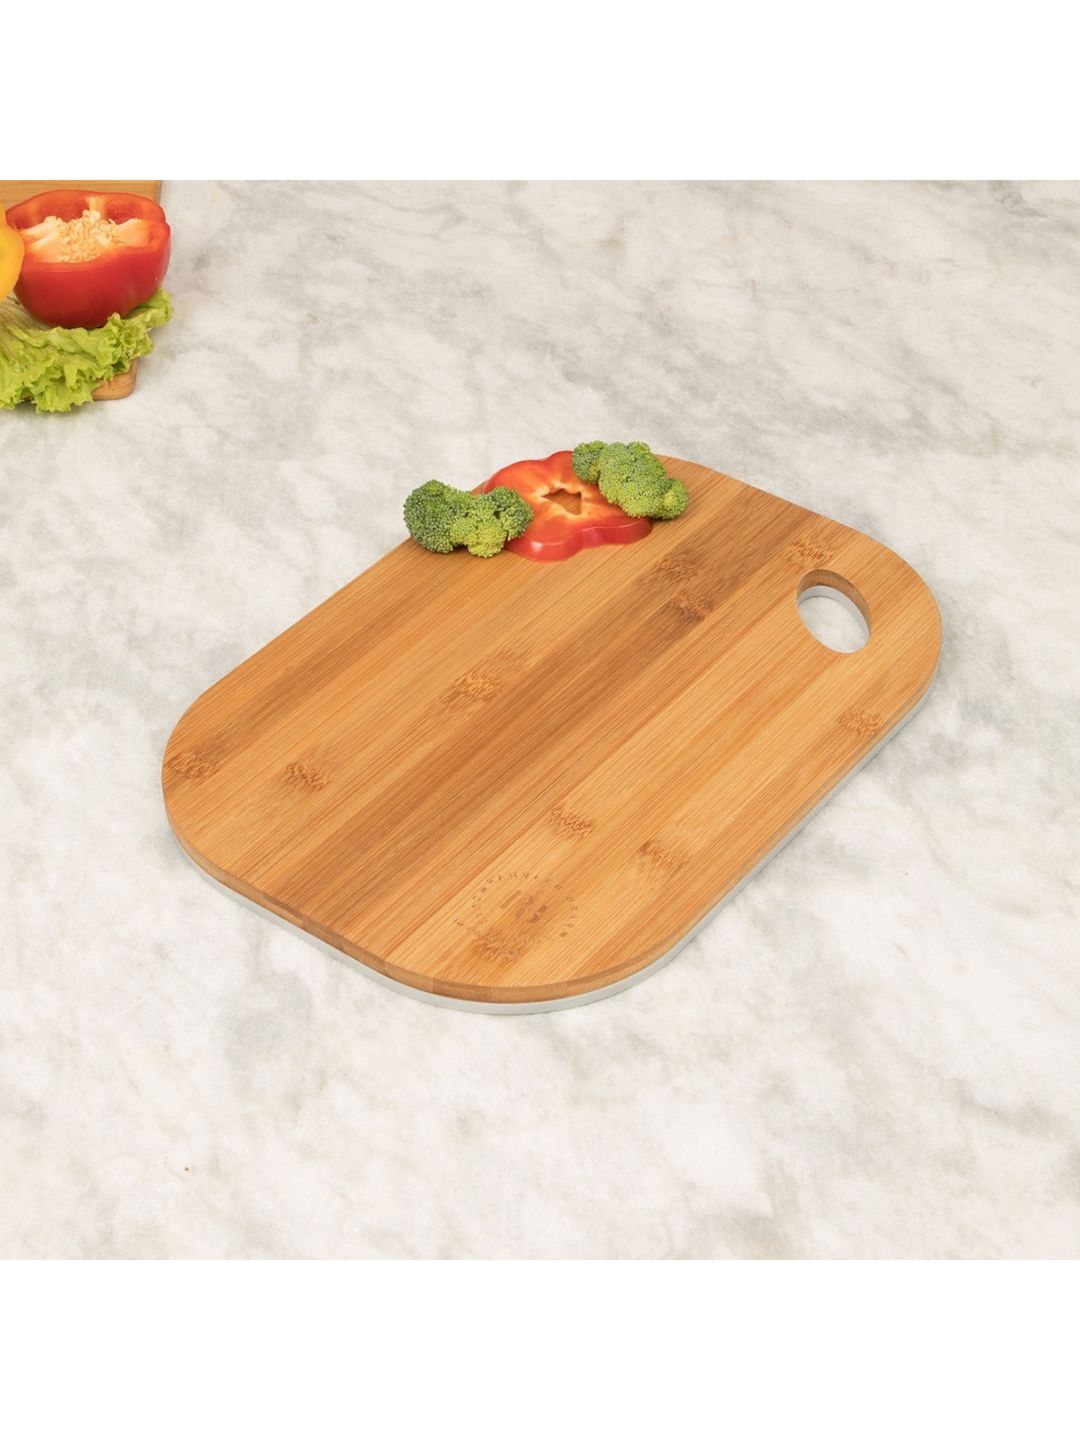 Home Centre Truffles Edulis Brown Solid Bamboo Double Sided Cutting Board Price in India